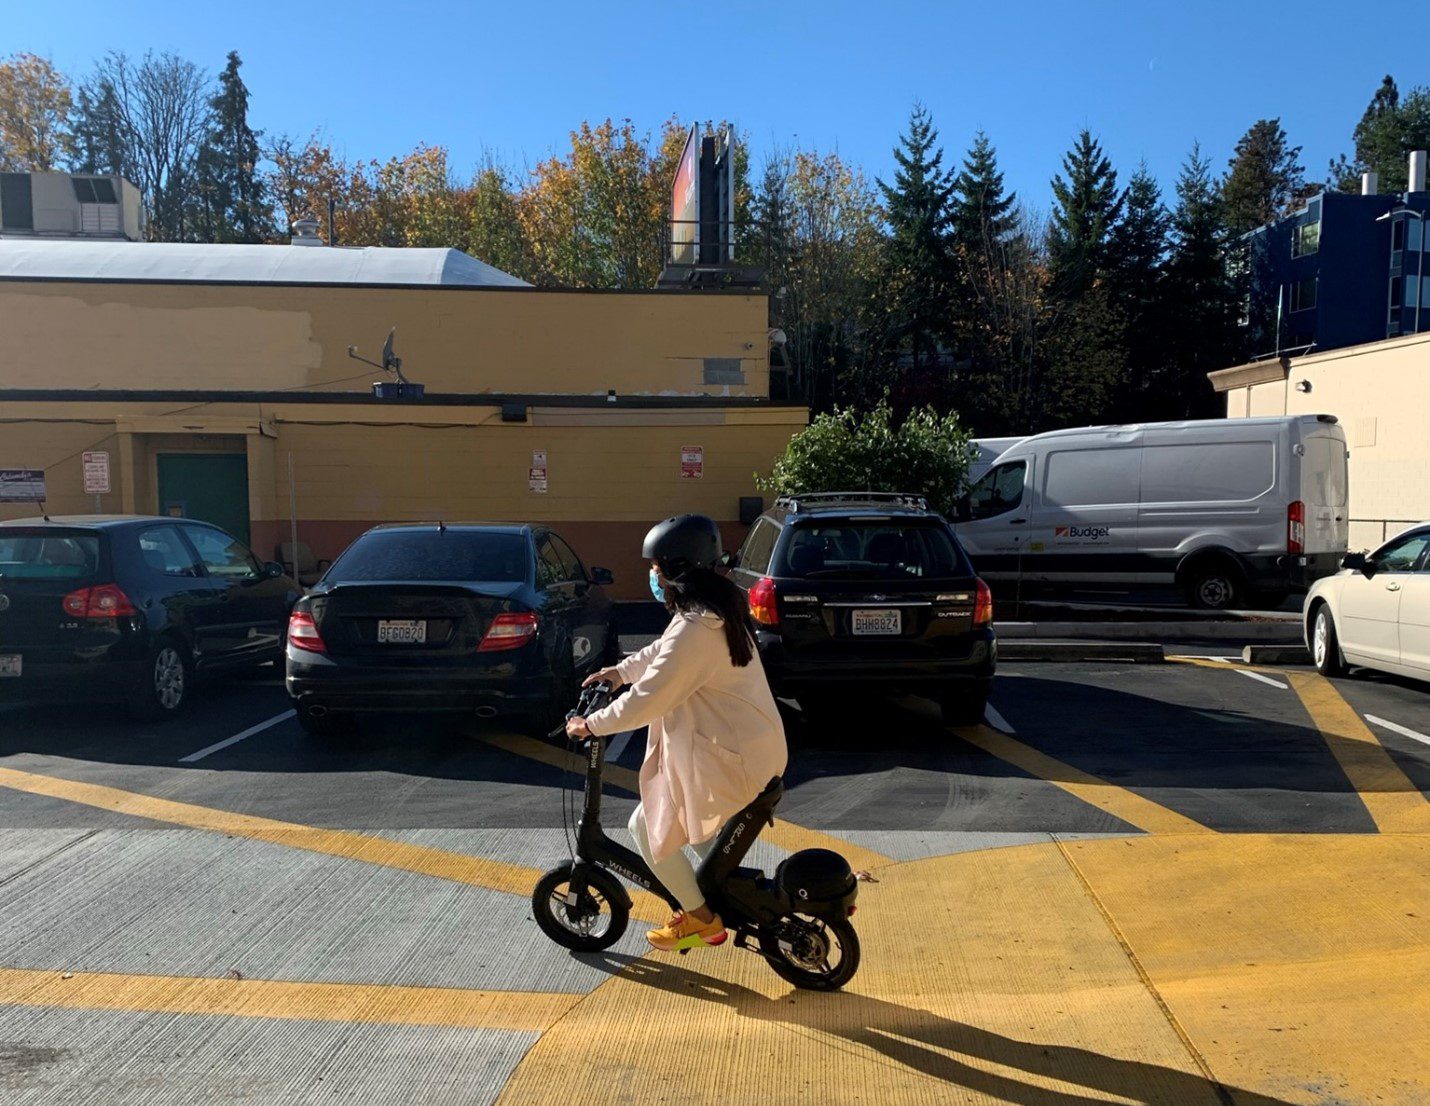 A woman practices riding a scooter at a scooter outreach event held in October 2021.